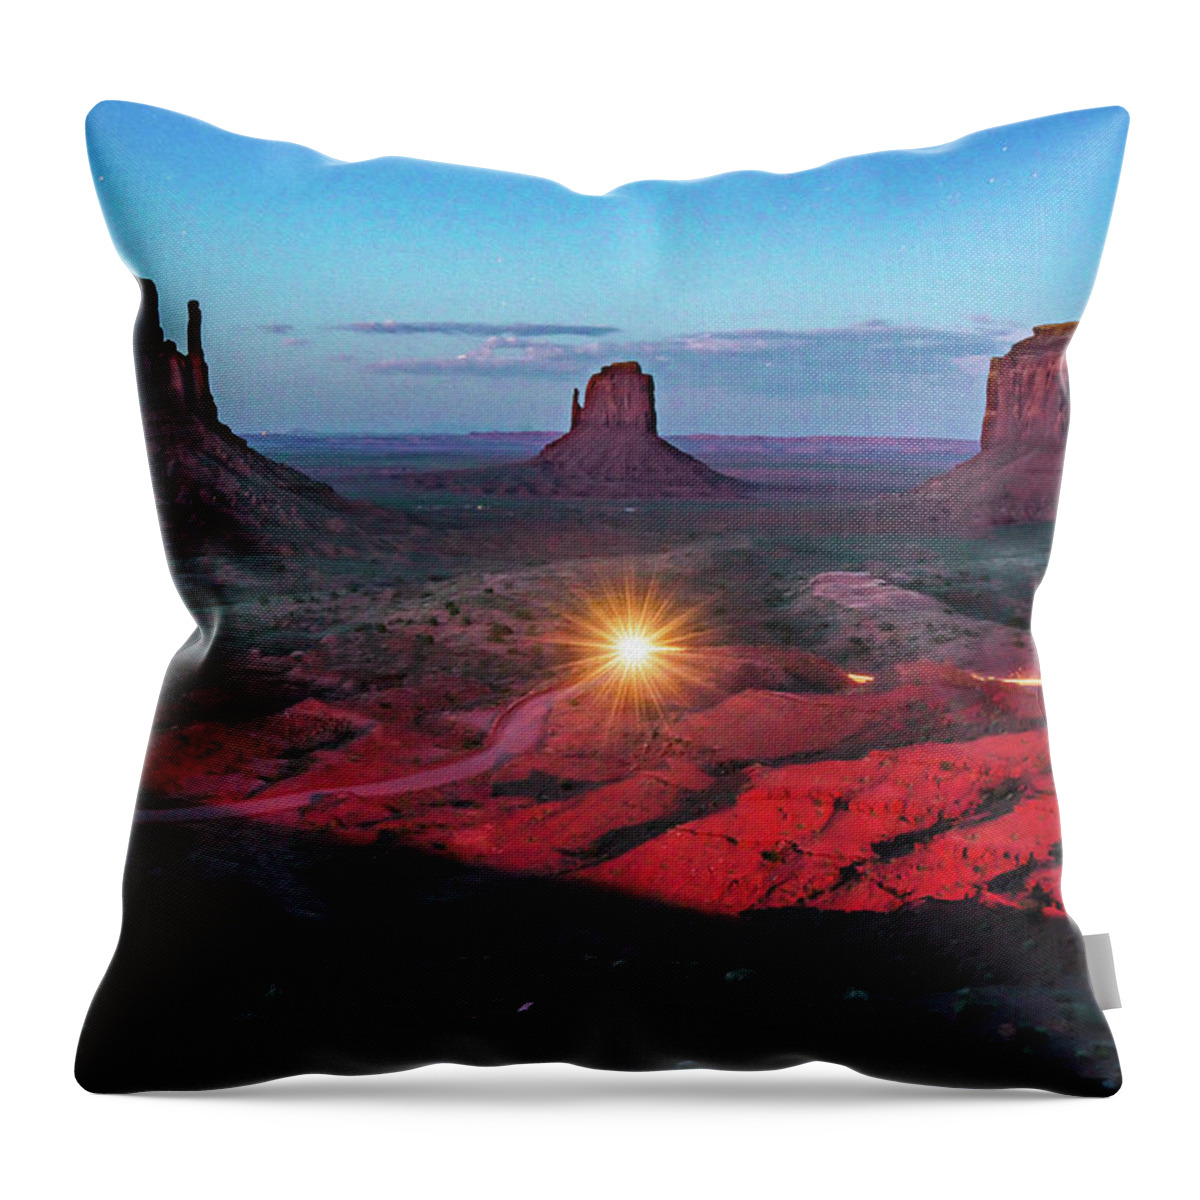 Monument Valley Throw Pillow featuring the photograph Lighting Up Monument Valley - Oil Paint Photography by Gregory Ballos